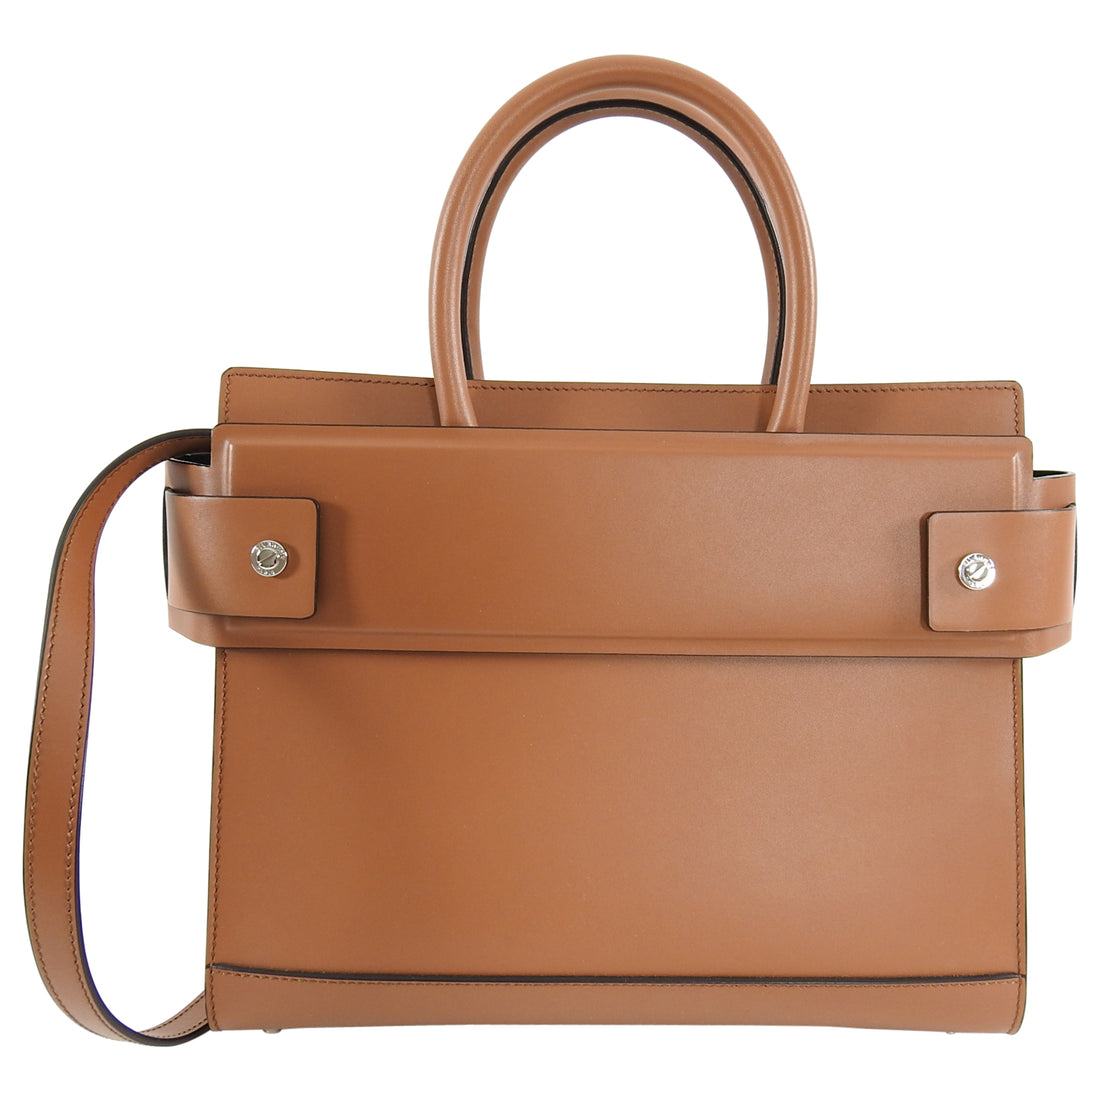 Givenchy Brown Small Structured Horizon Shoulder Bag